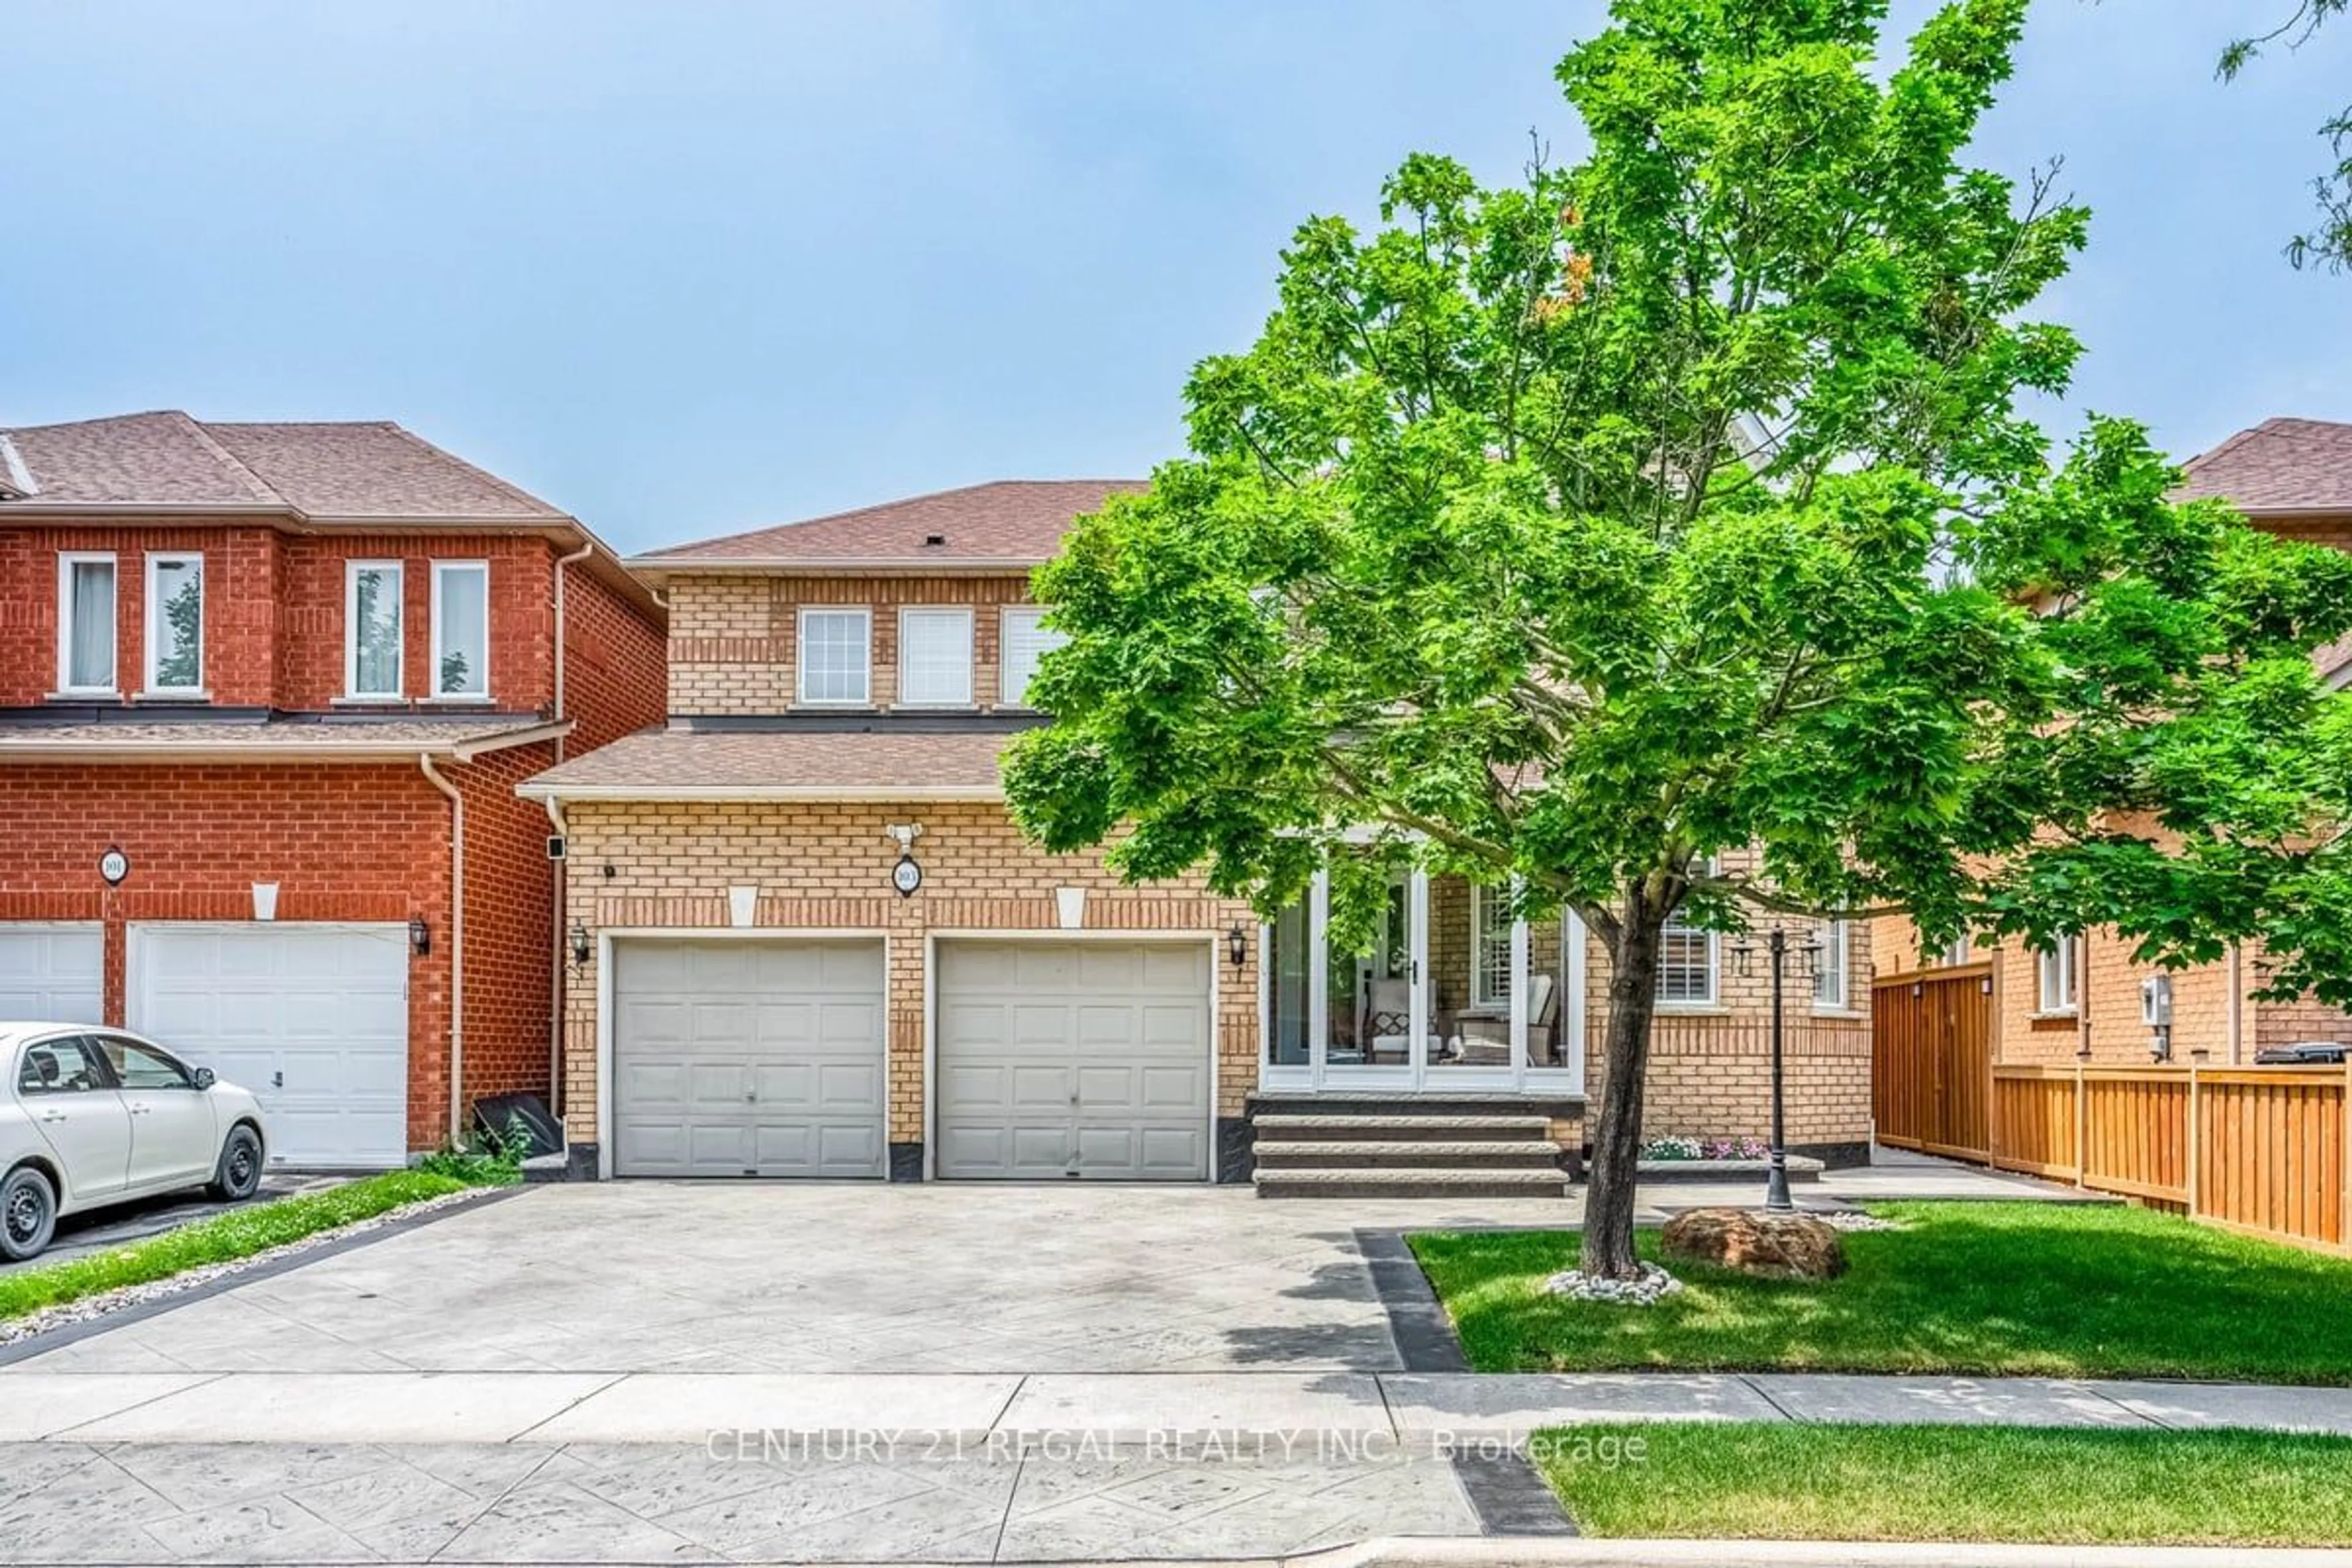 Home with brick exterior material for 103 Woodvalley Dr, Brampton Ontario L7A 2G1